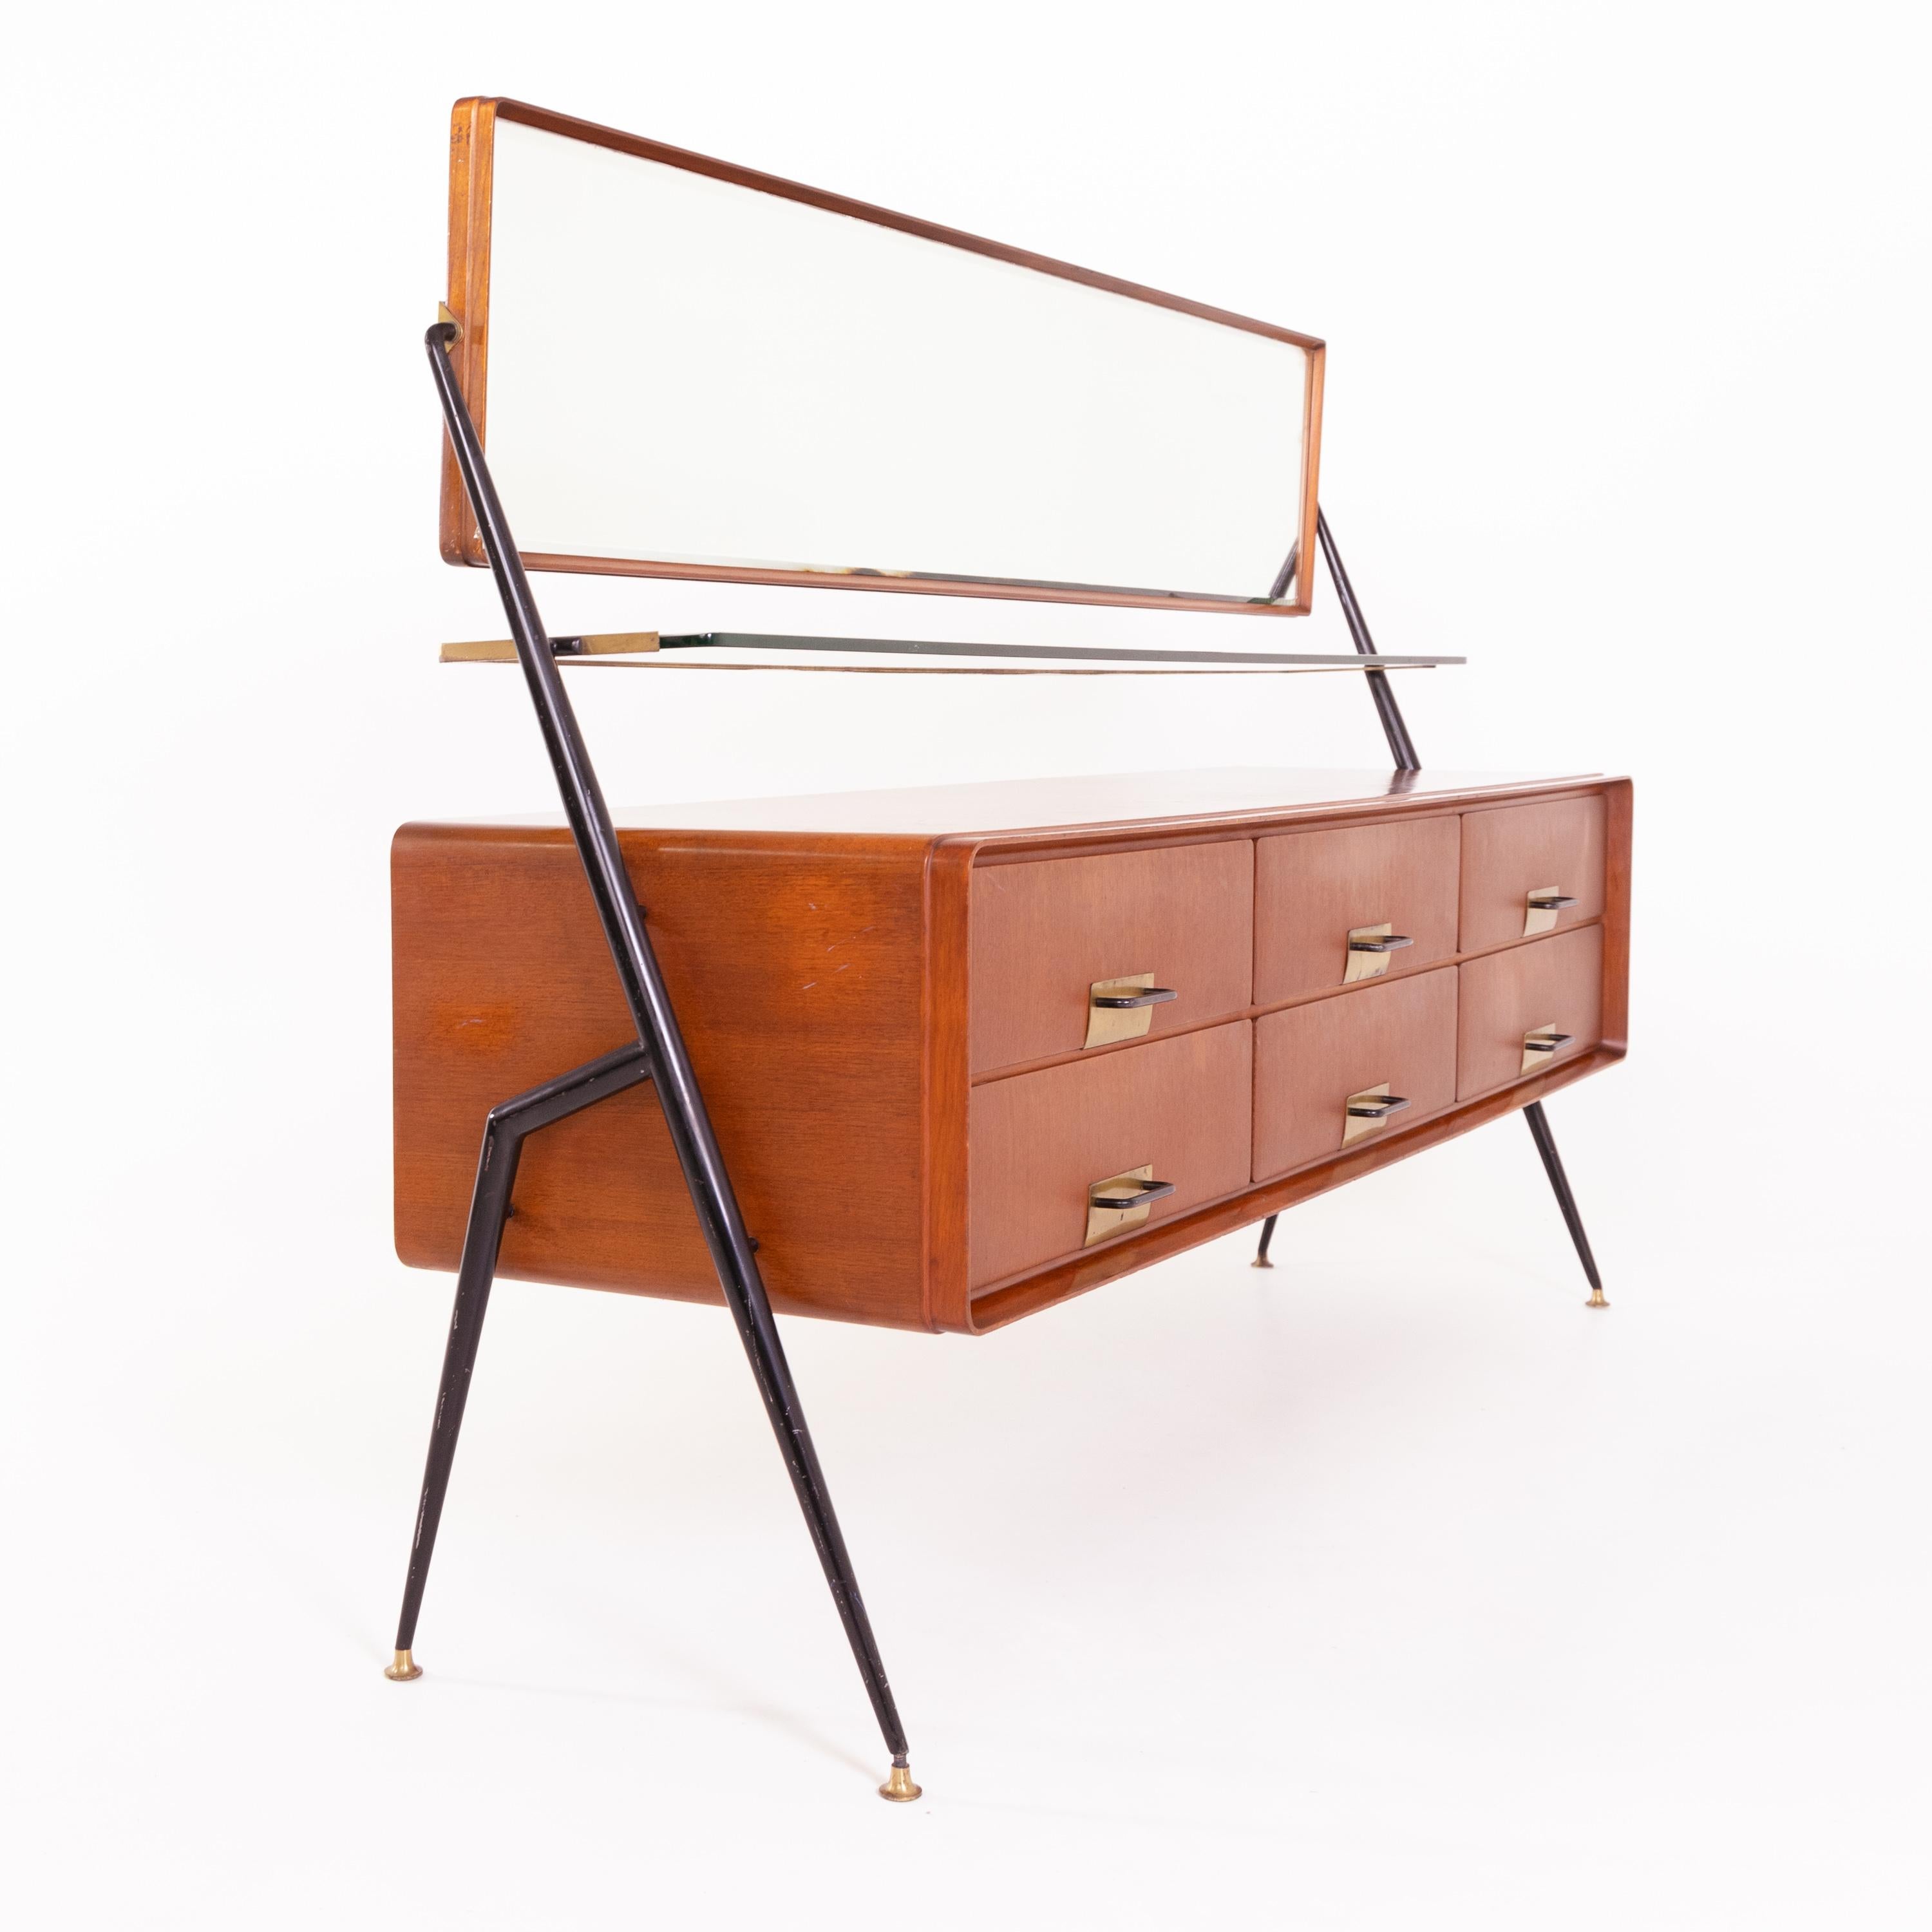 Large sideboard designed by Silvio Cavatorta in the 1960s. The sideboard is standing on conical iron feet, with six drawers, a glass shelf, and tilting wide mirror on top.
  